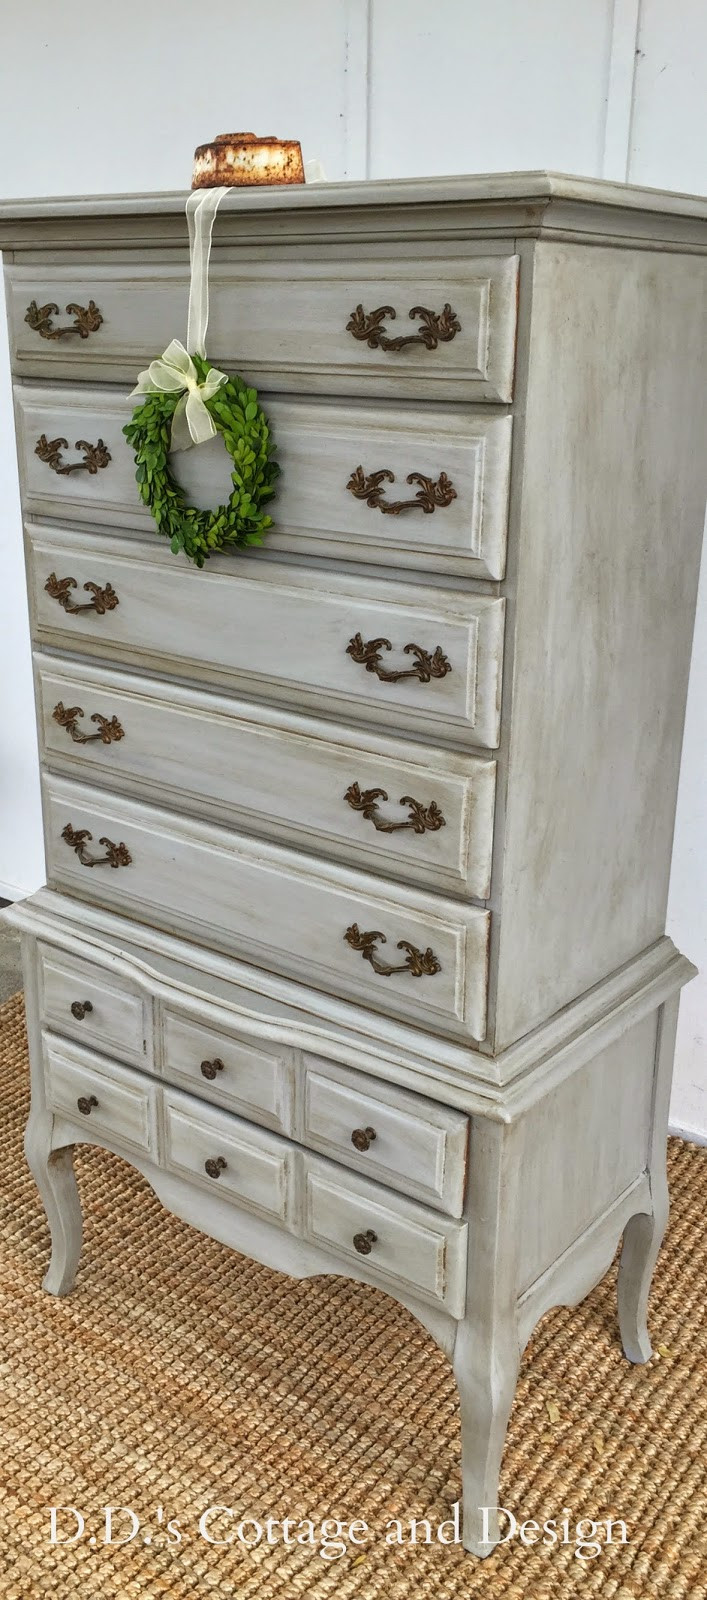 Chalk Paint Bedroom Furniture
 D D s Cottage and Design Grey French Provincial Chest on